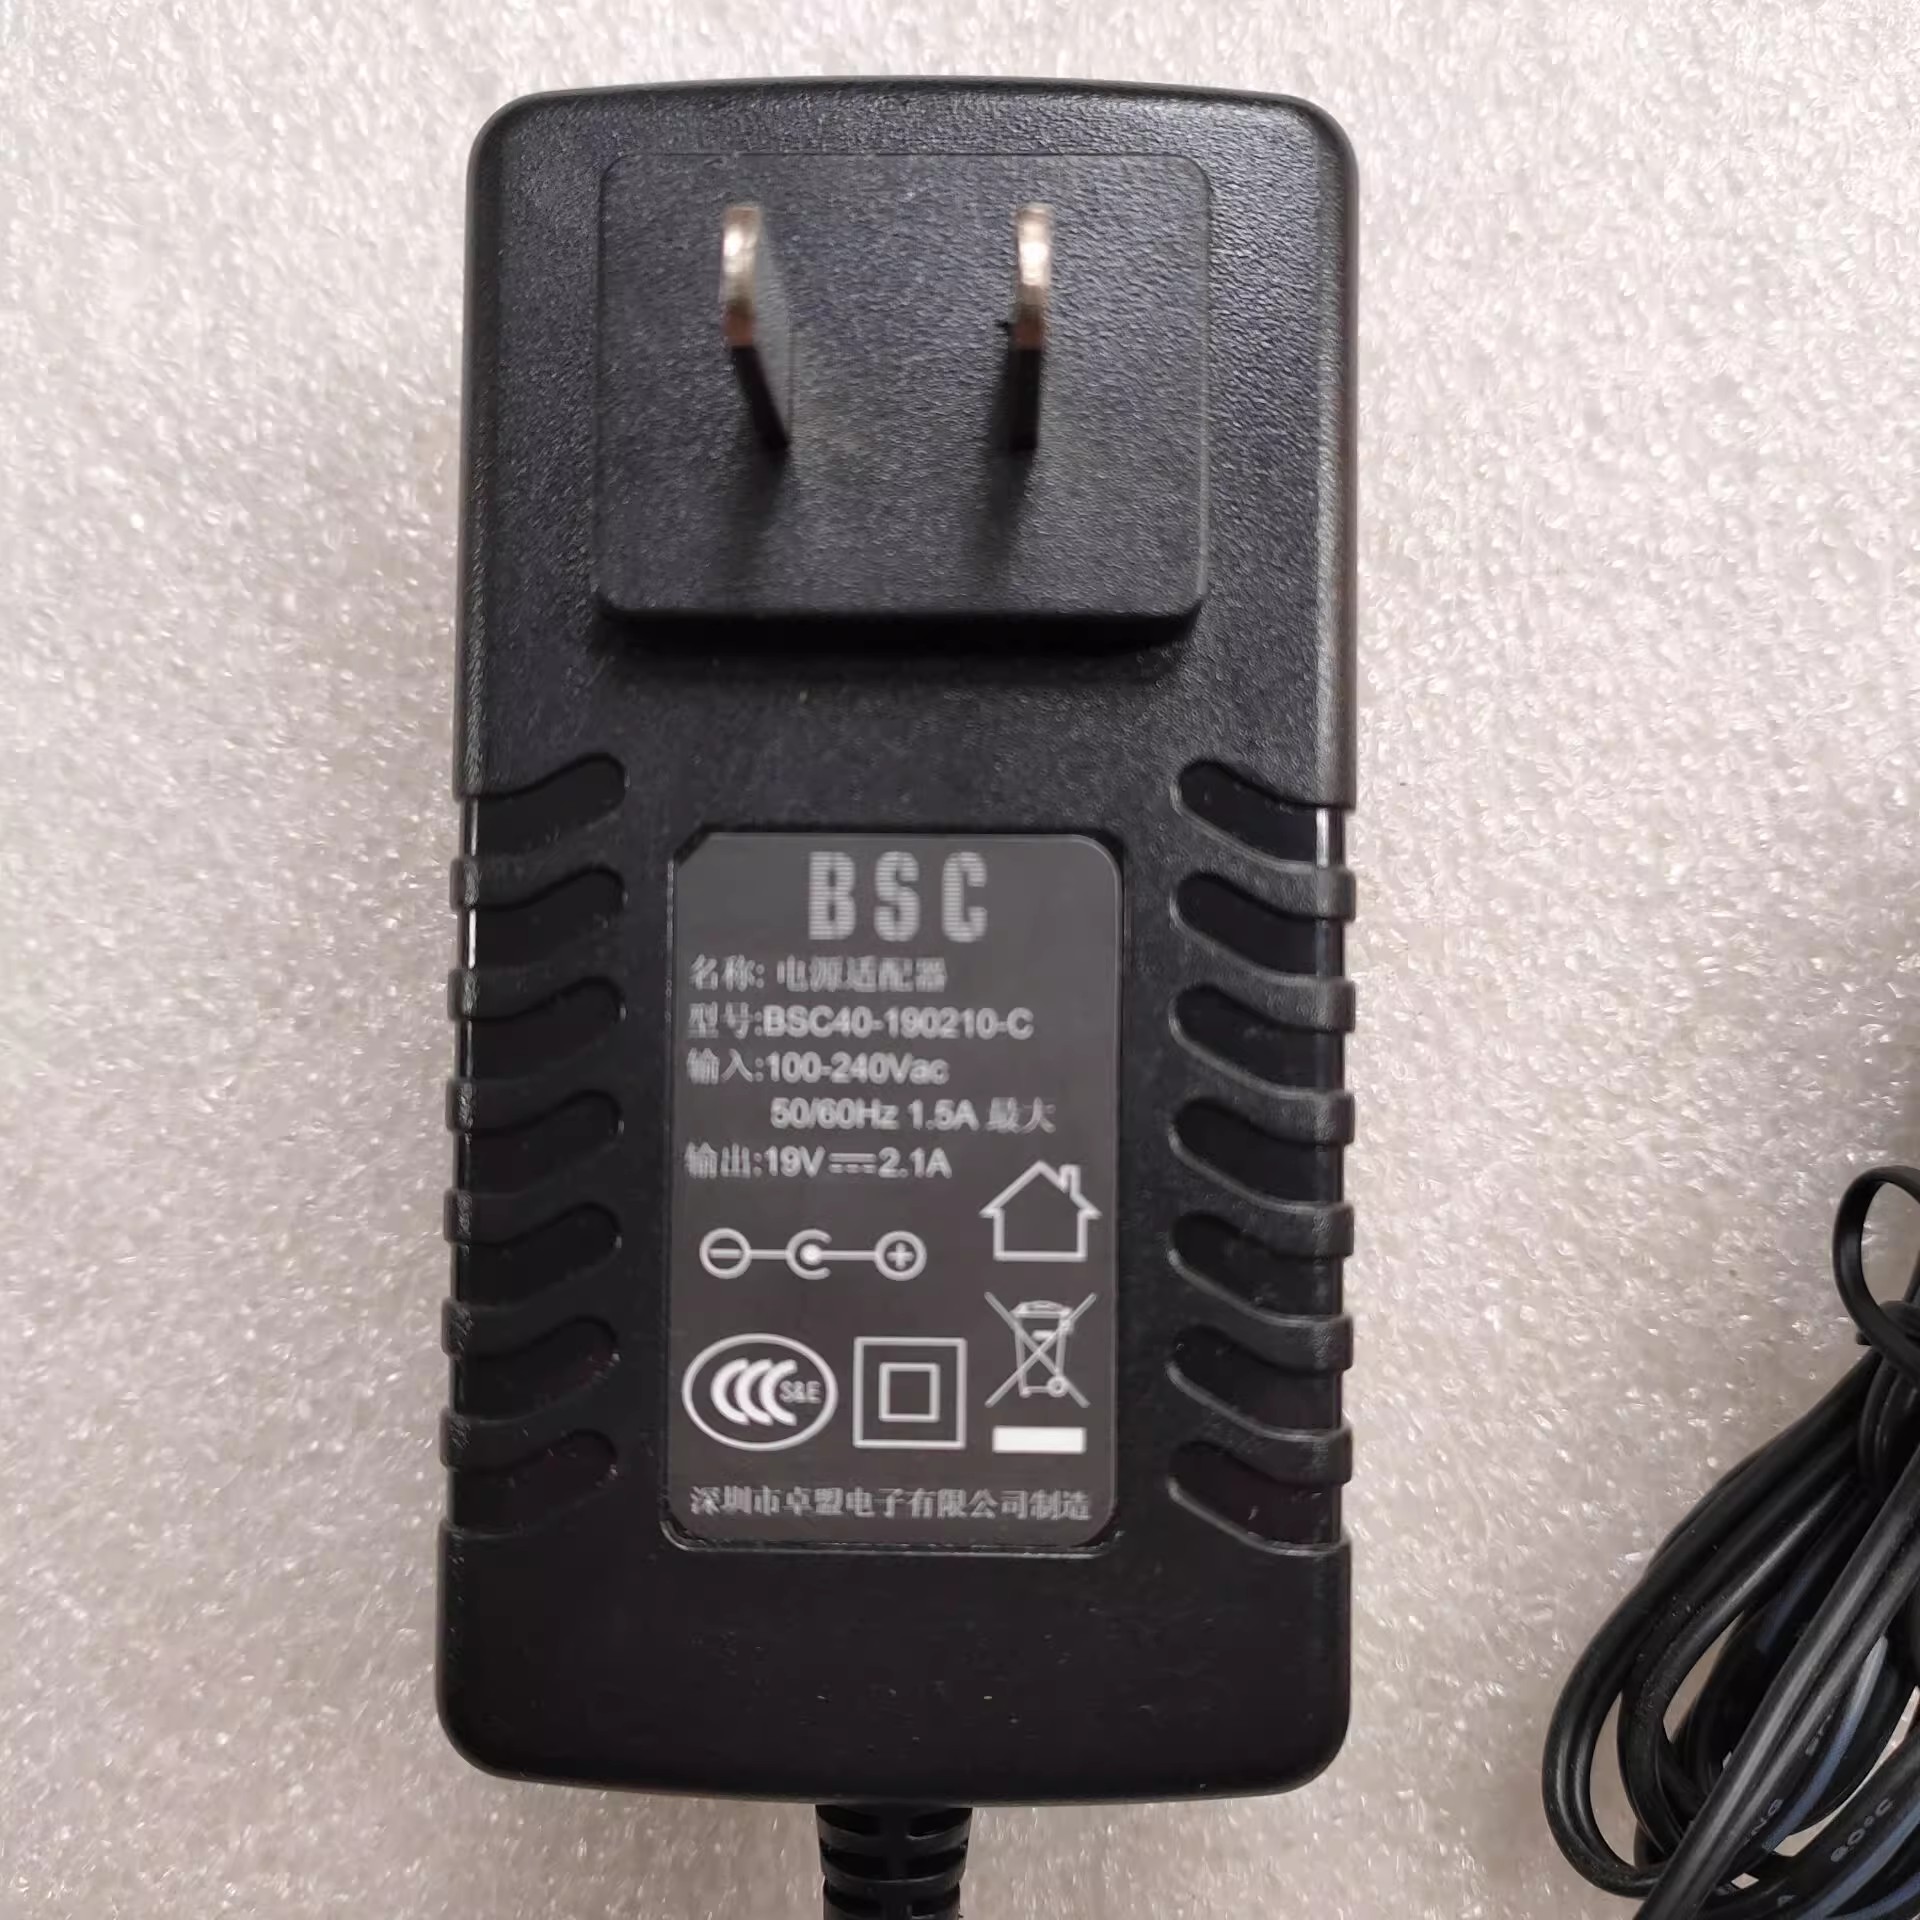 *Brand NEW*3.5MM*1.35MM BSC AC100-240V 50/60Hz 19V 2.1A AC DC ADAPTHE BSC40-190210-C POWER Supply - Click Image to Close